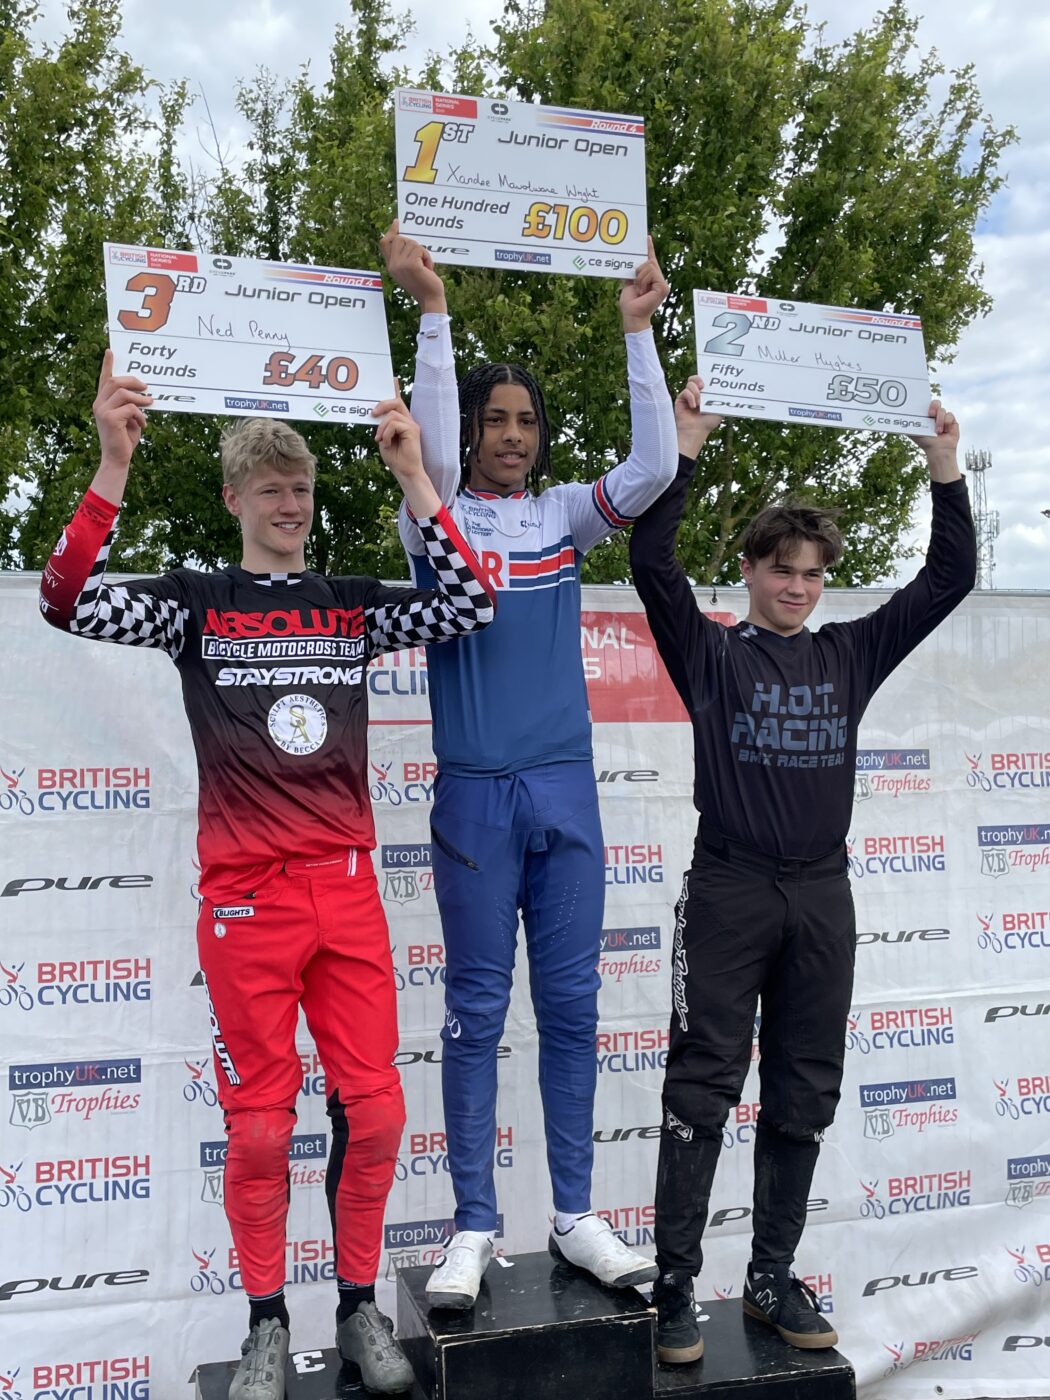 Three young men are pictured standing alongside each other on a pedestal, in 3rd, 2nd and 1st place, at the National BMX Championships.